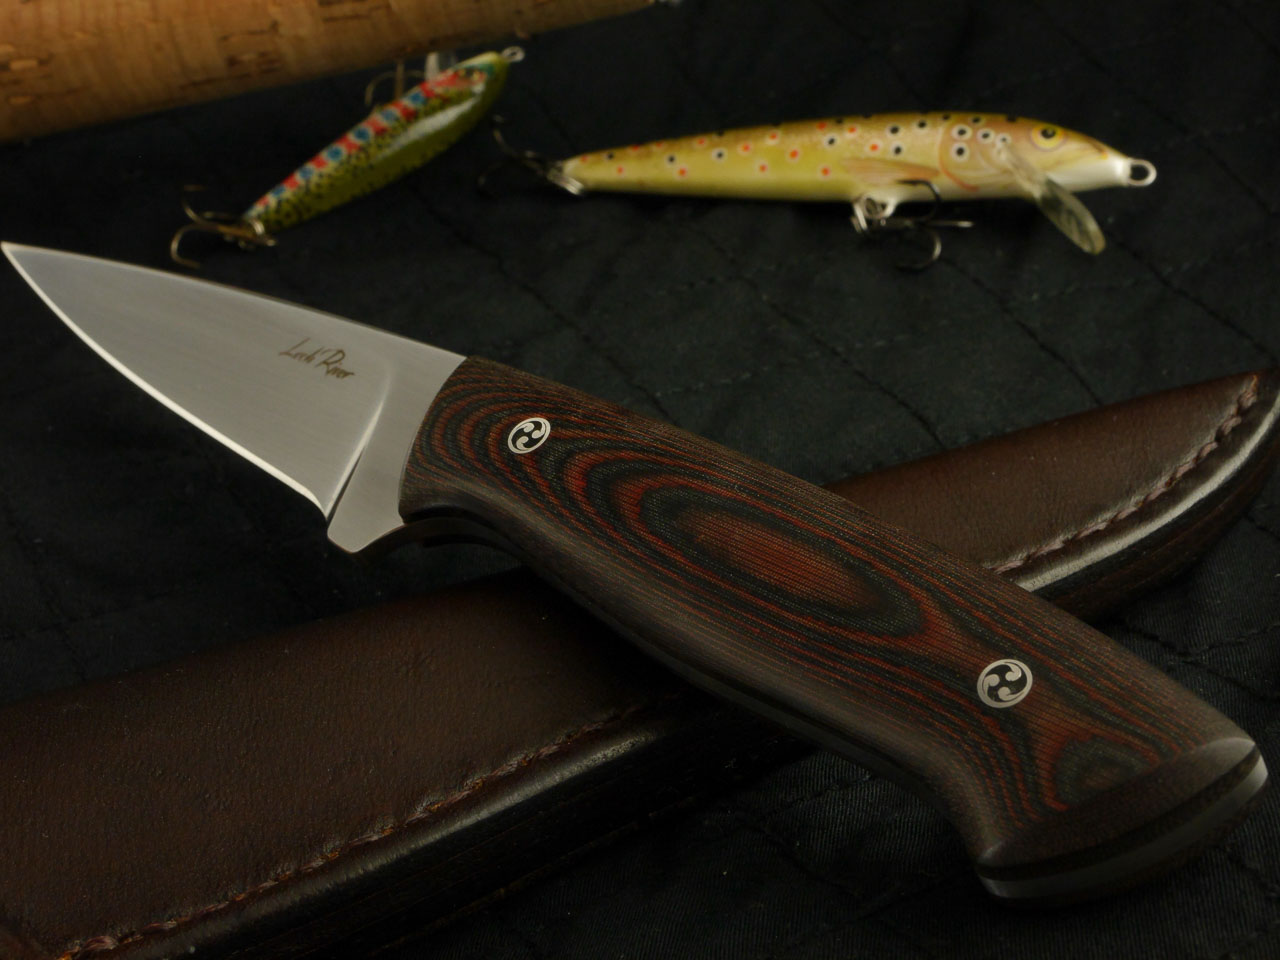 Custom made Fishing knife with a brown Micarta handle and an extremely fine tip. Blade made from N690 Steal